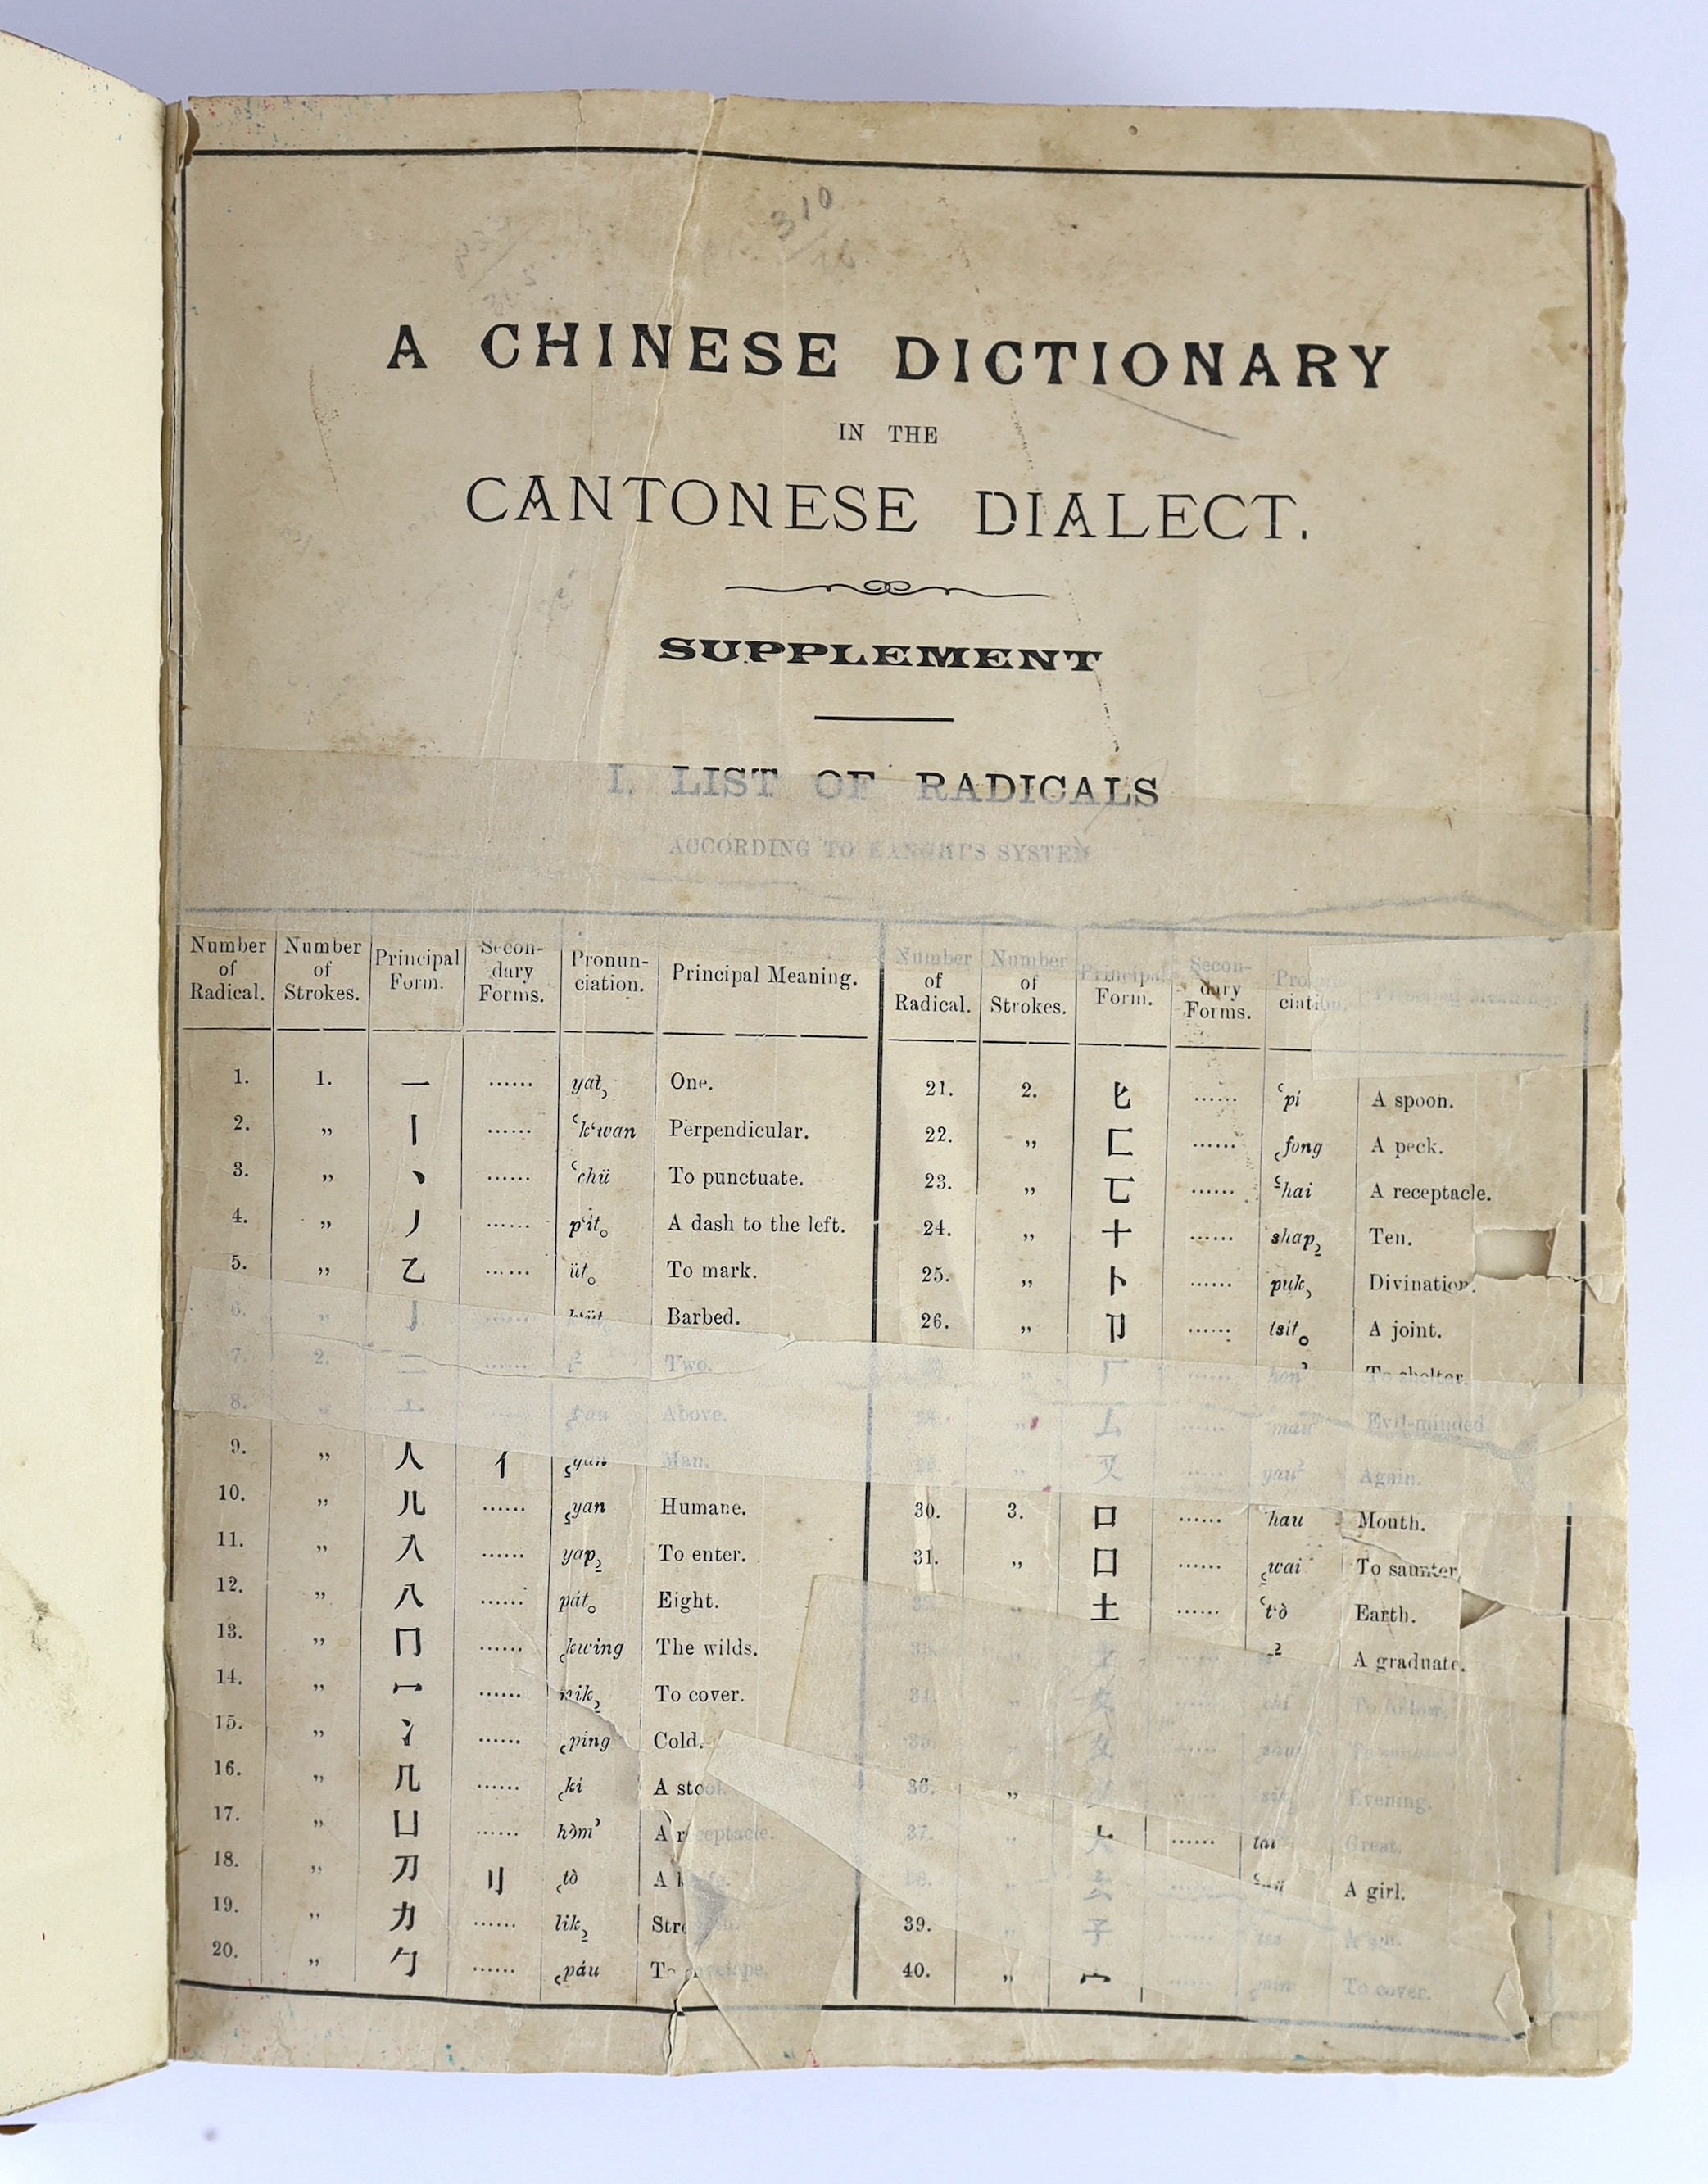 Eitel, Ernest John - A Chinese-English Dictionary in the Cantonese Dialect. (2nd edition), revised and enlarged by Immanuel Gottlieb Genahr ... (2 parts bound together); old half calf and buckram, panelled spine with bla